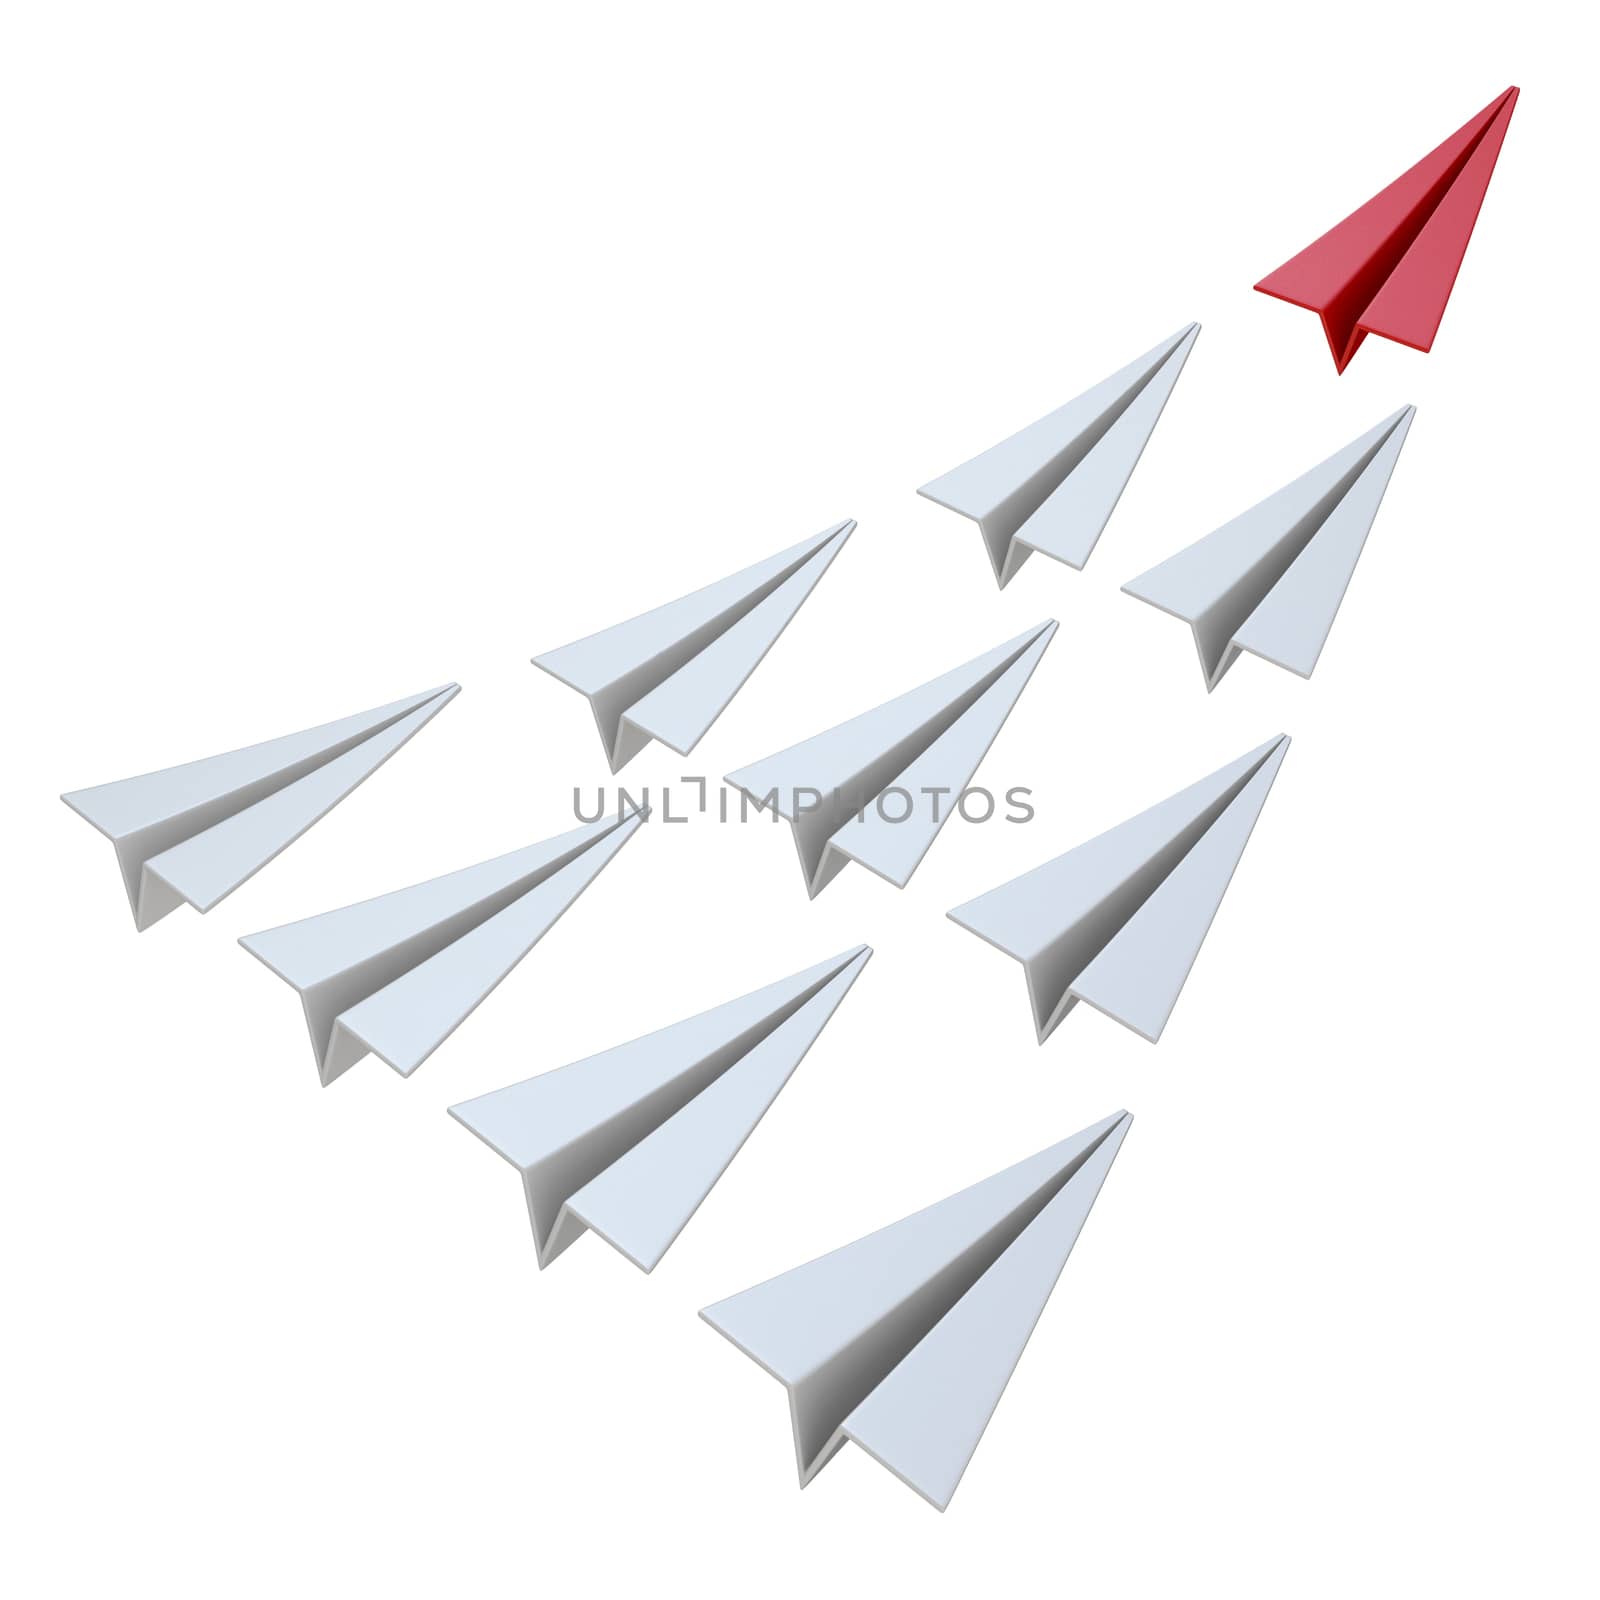 Red paper plane leader 3D rendering illustration isolated on white background